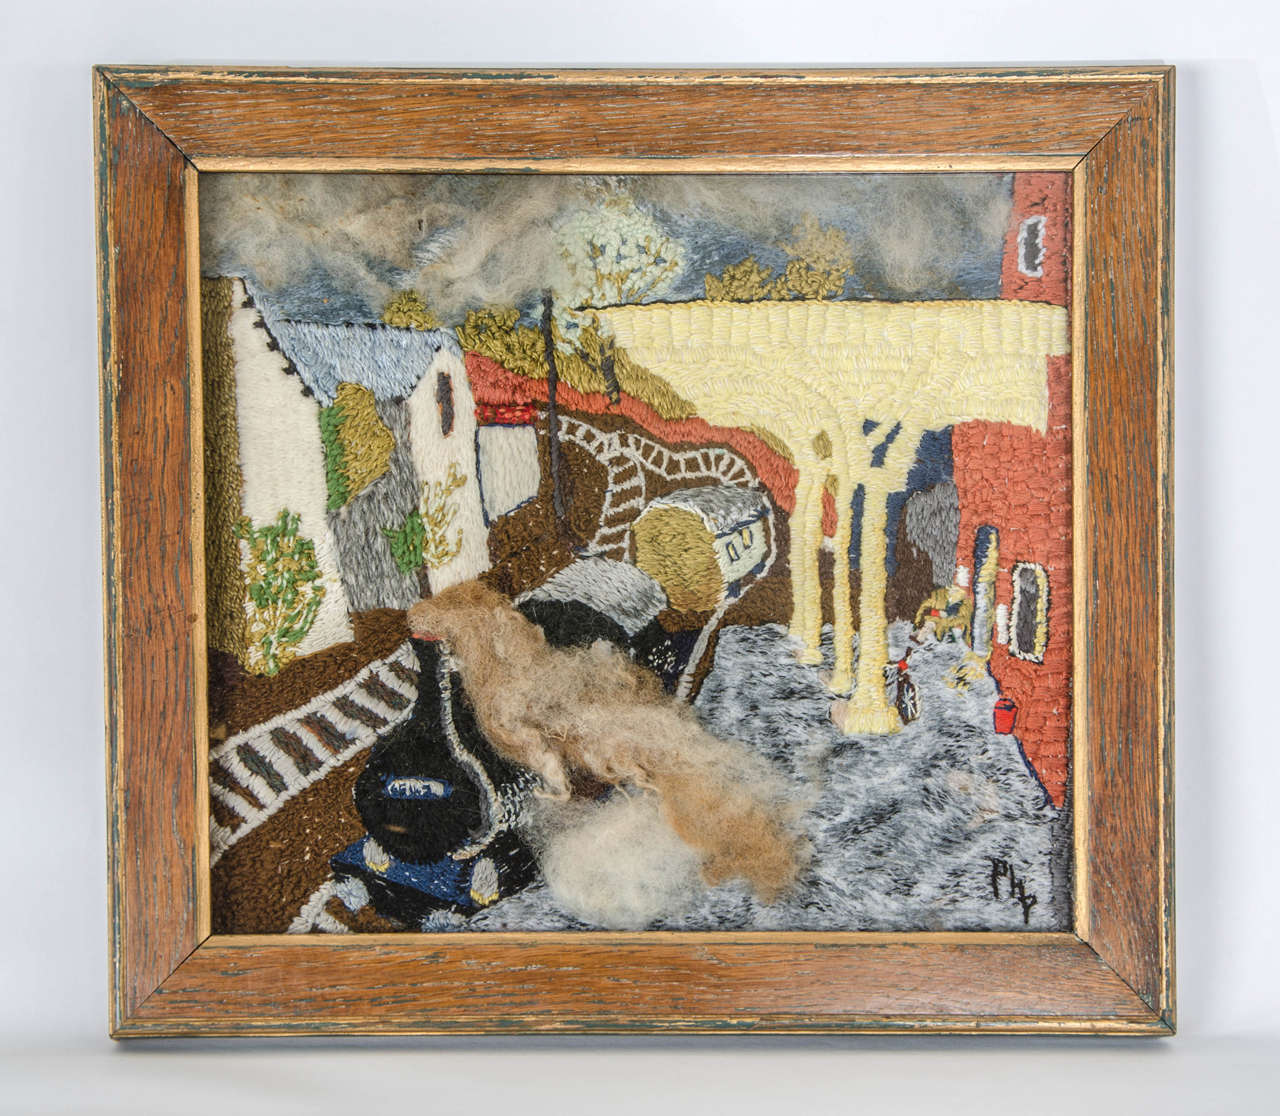 A charming mid 20th century wool work picture of a train leaving a rural station, in a wood frame.